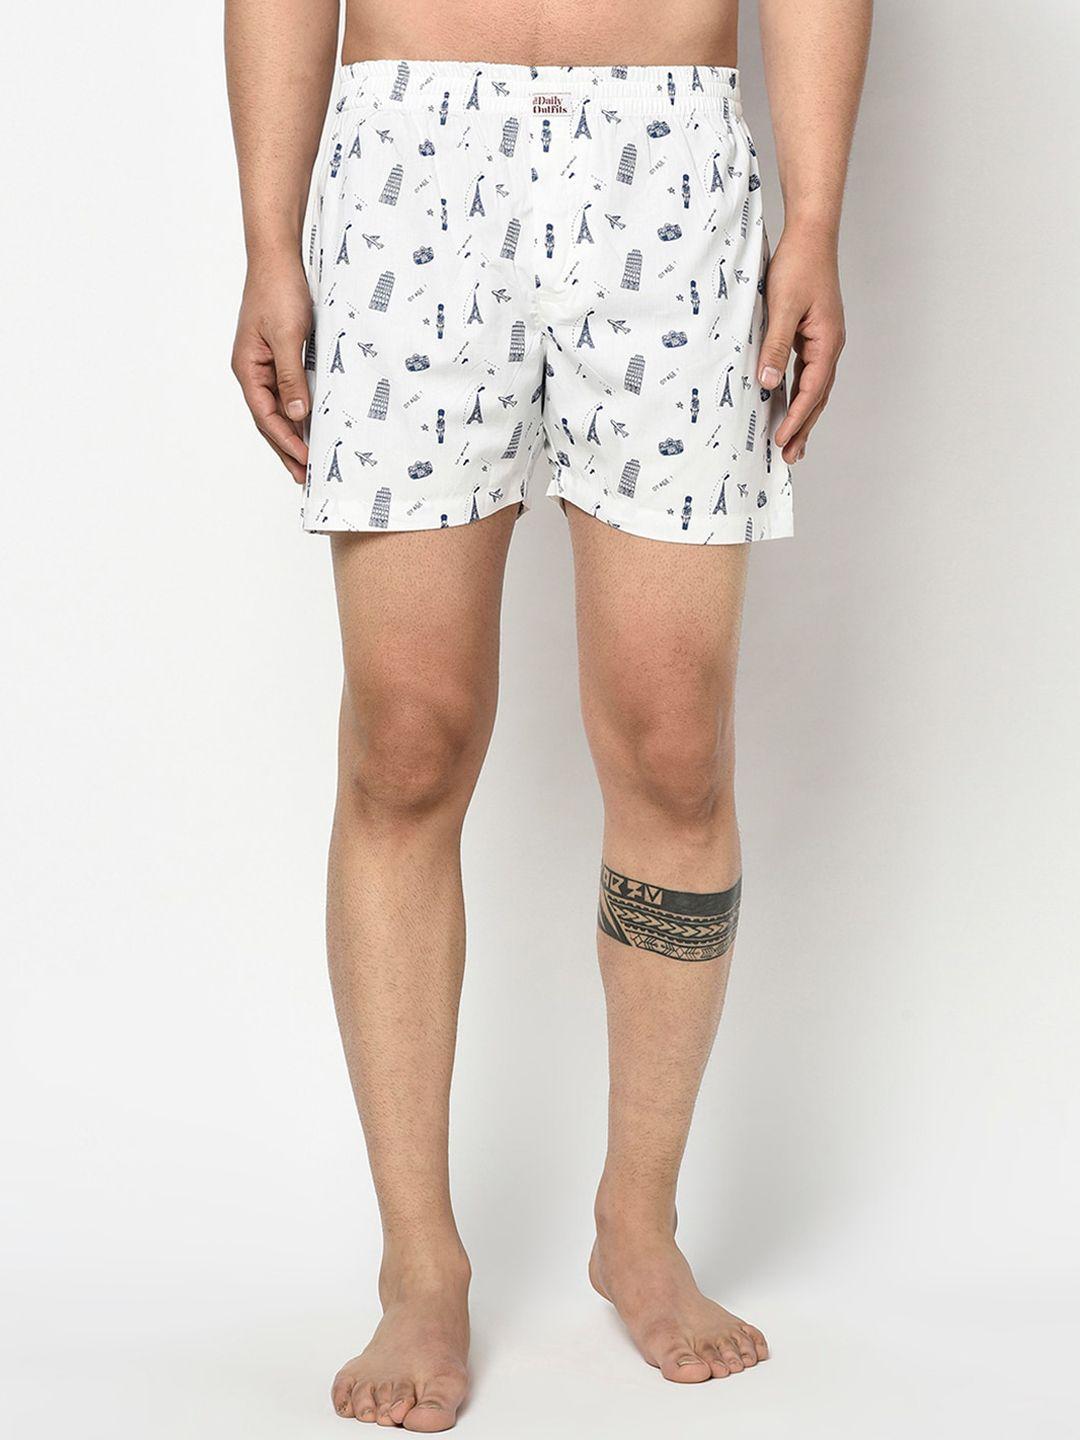 the-daily-outfits-men-white-printed-pure-cotton-seven-wonders-boxer